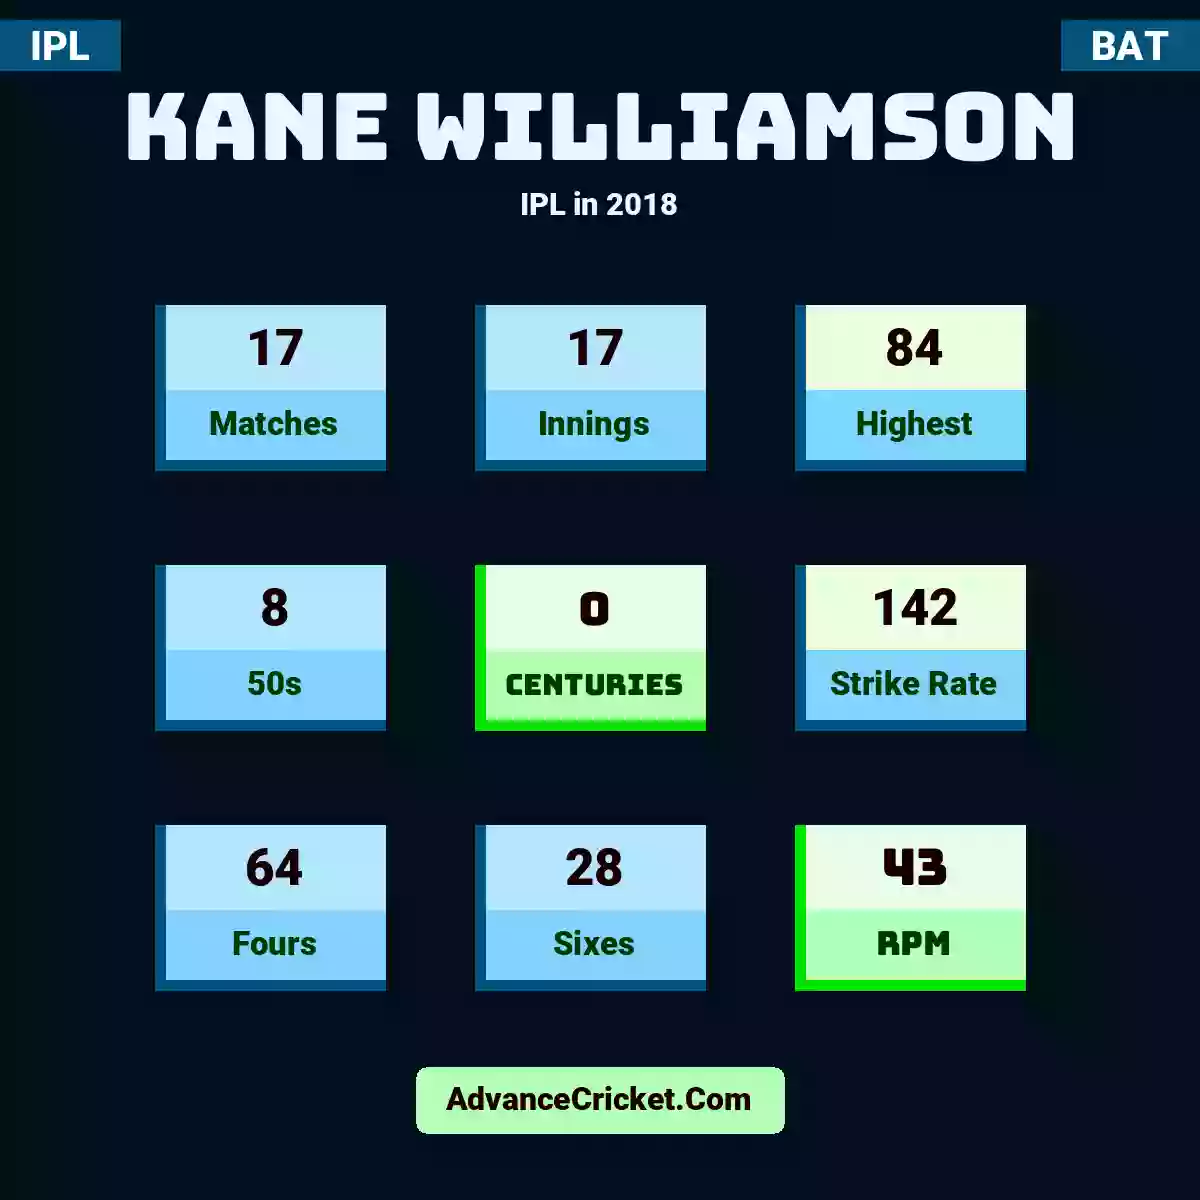 Kane Williamson IPL  in 2018, Kane Williamson played 17 matches, scored 84 runs as highest, 8 half-centuries, and 0 centuries, with a strike rate of 142. K.Williamson hit 64 fours and 28 sixes, with an RPM of 43.